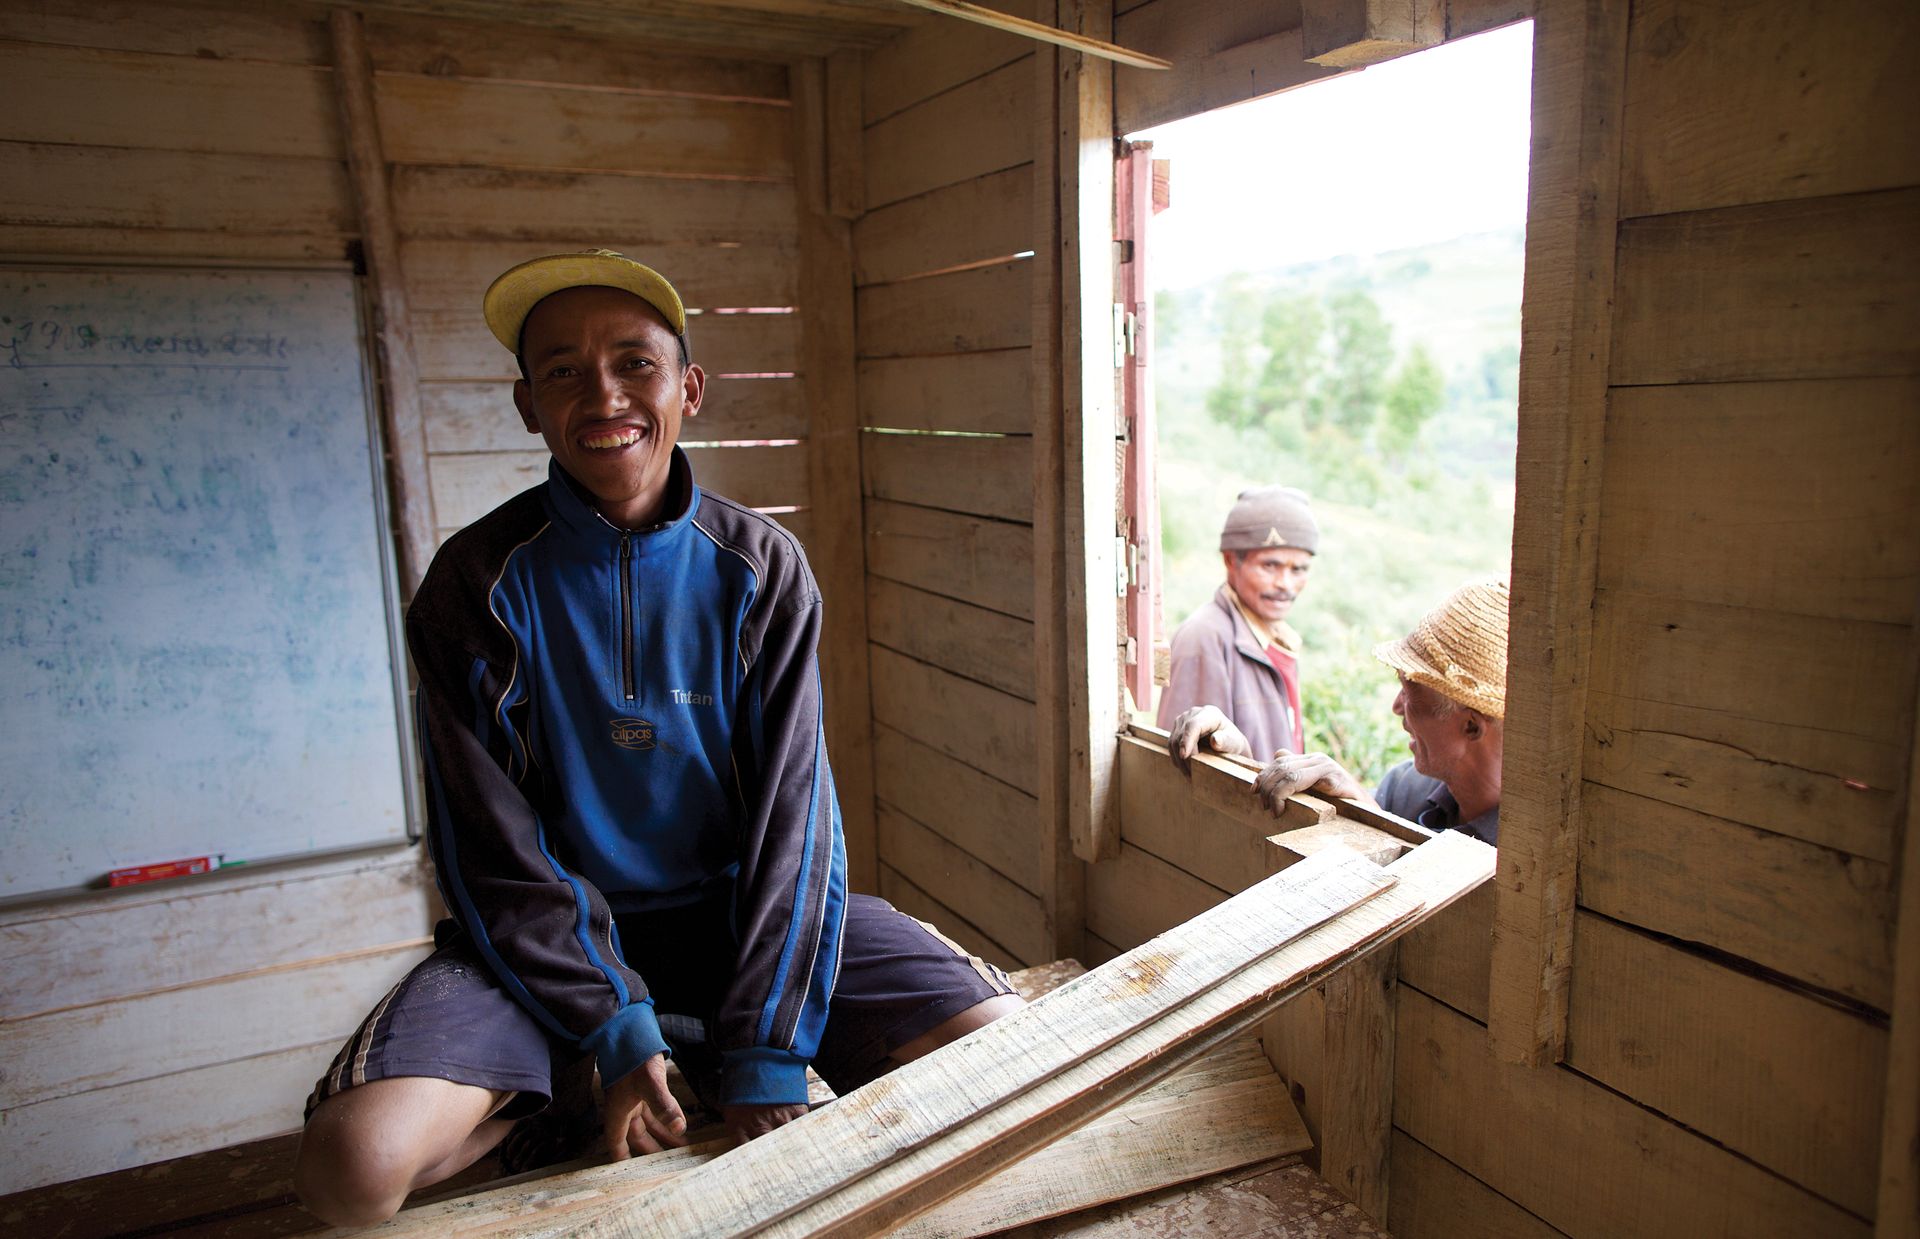 In 2013, members in Sarodroa built this small wooden chapel to worship in. Rakotomalala is happy to help make needed changes to the building.